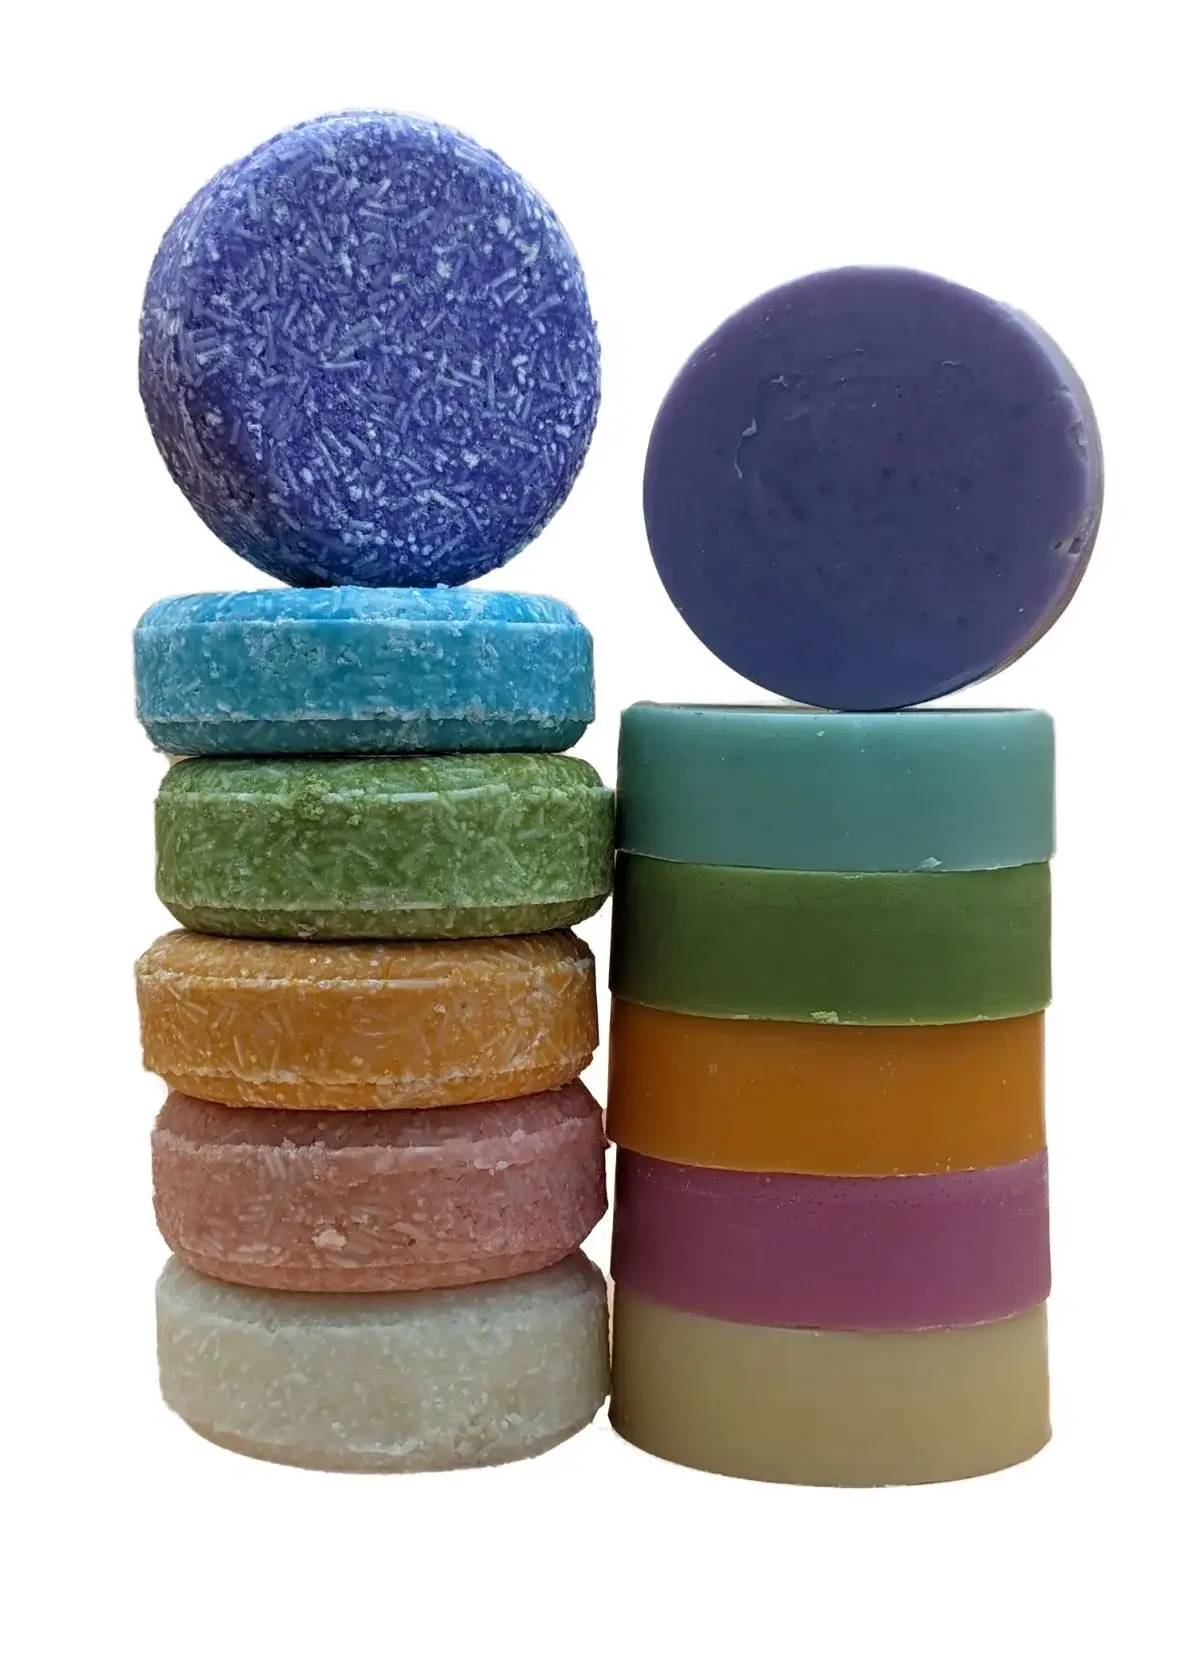 How to choose the right shampoo bar for color treated hair?